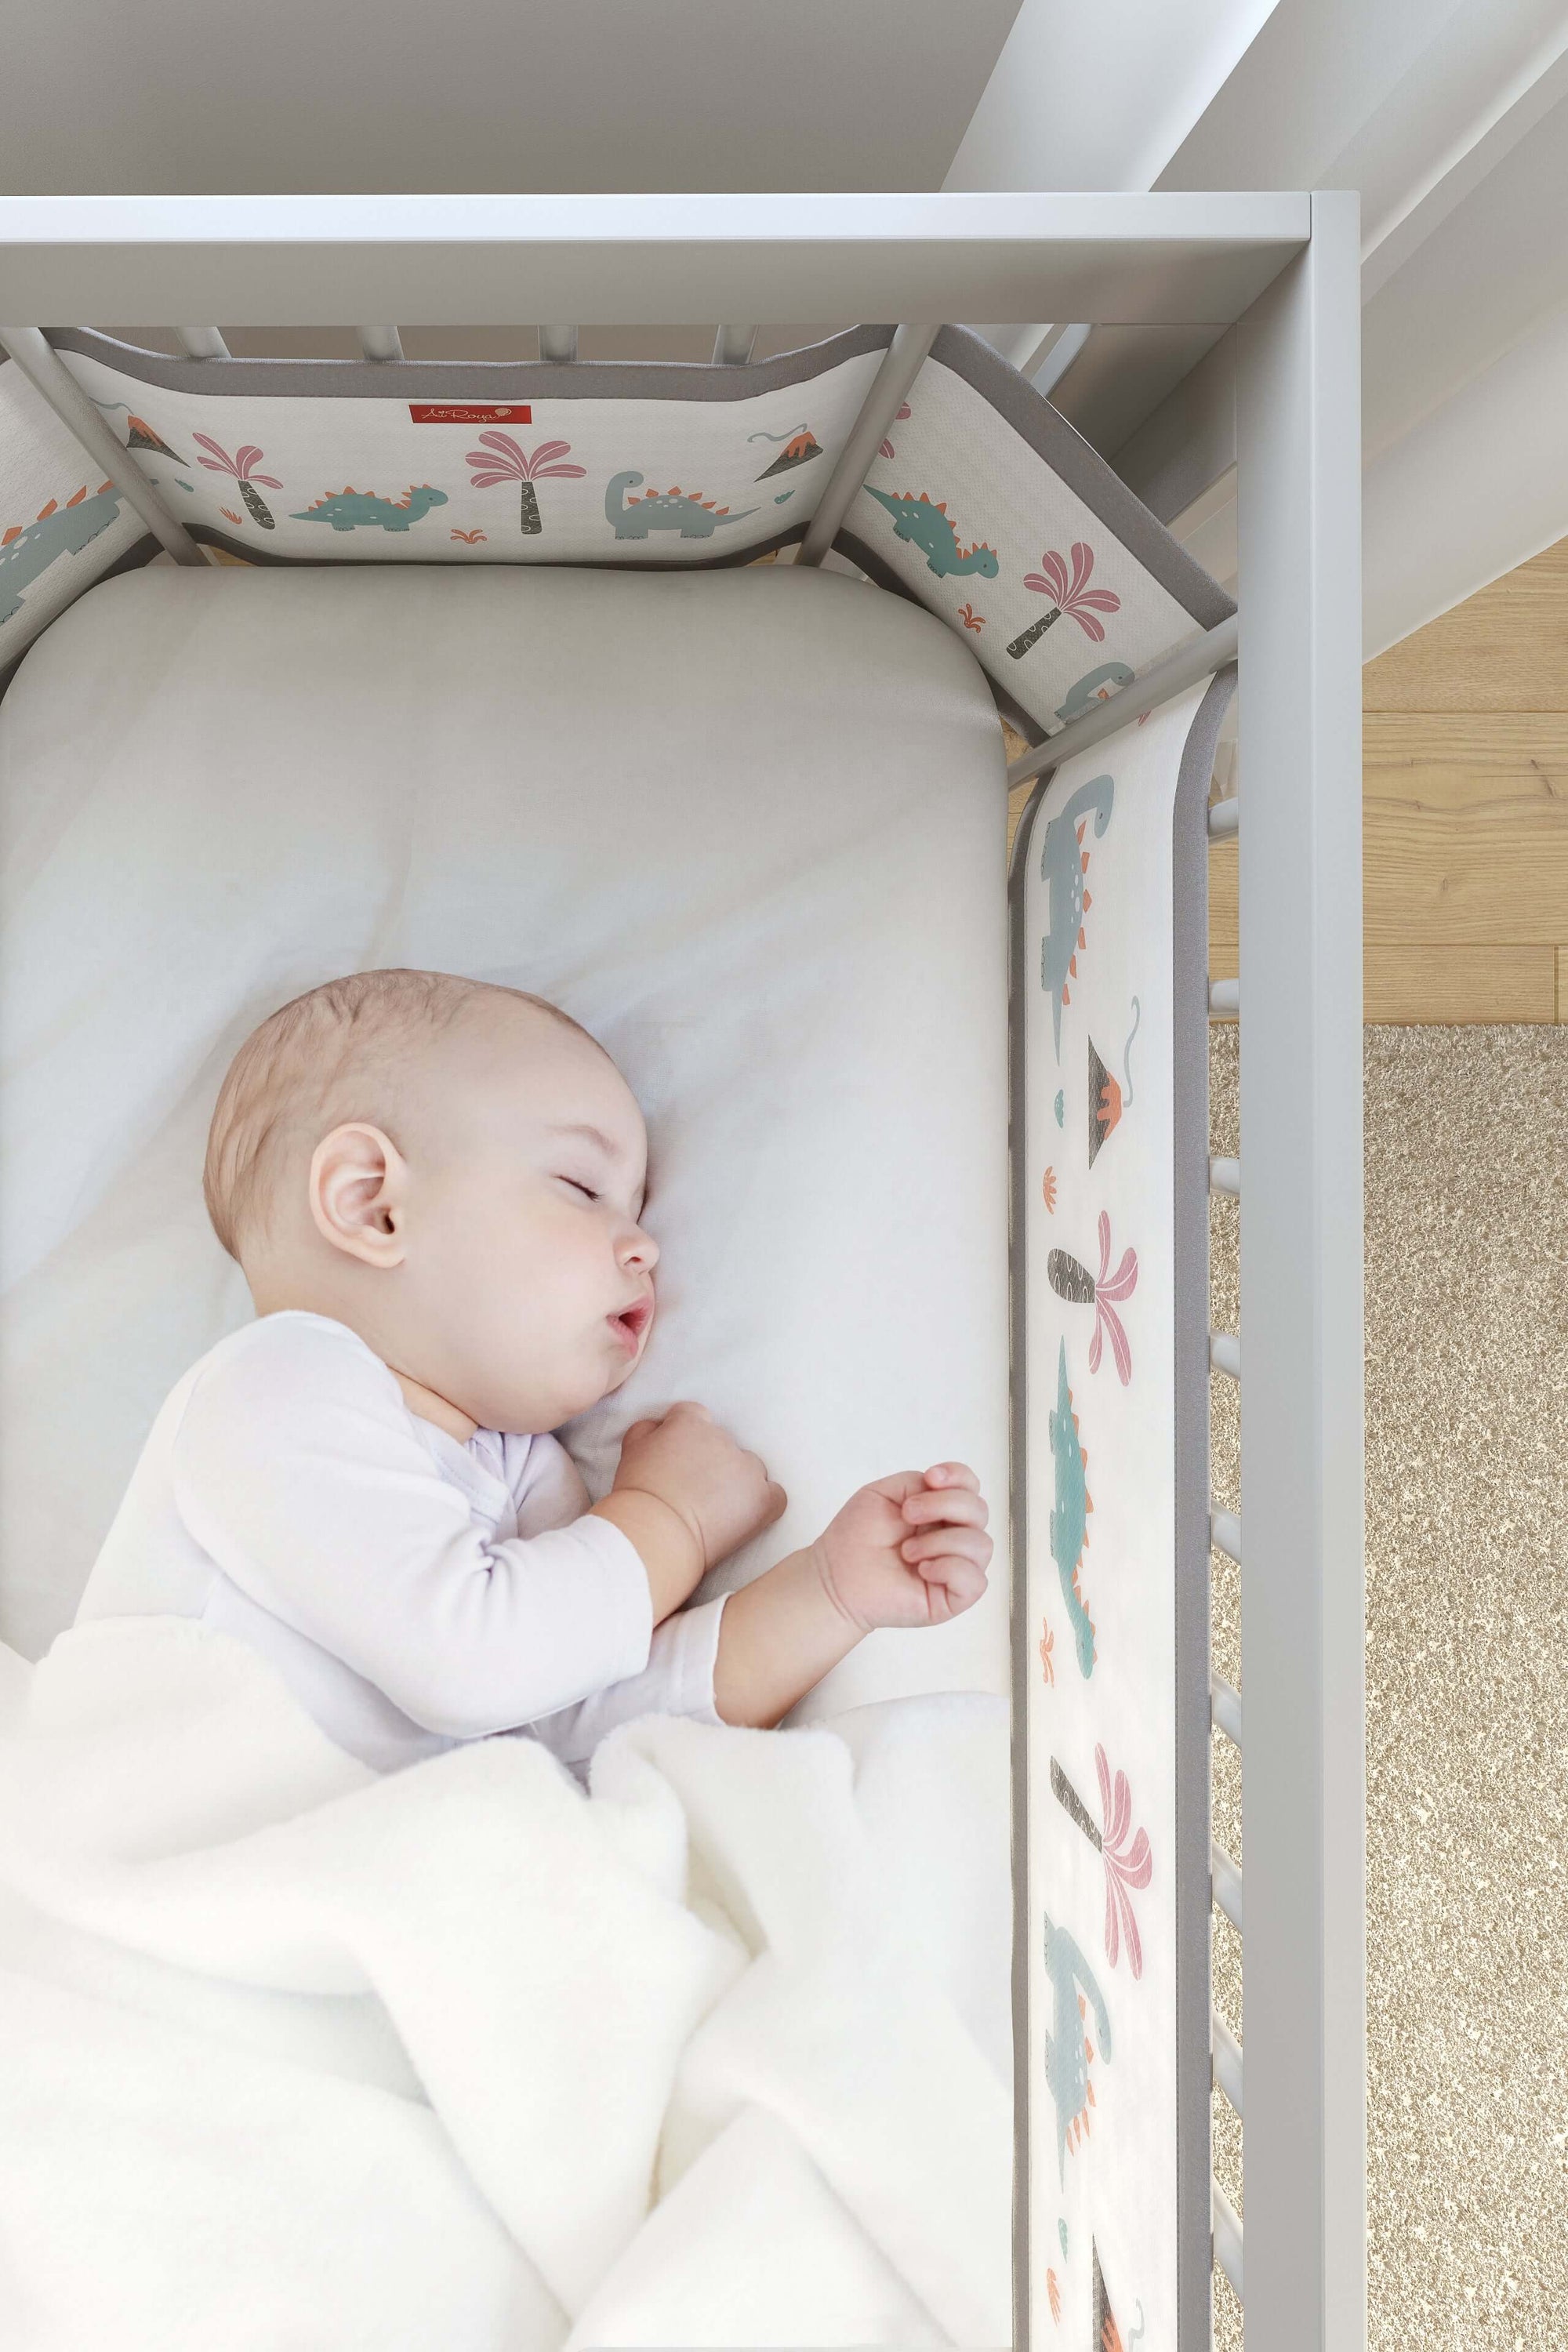 Baby spend more than 12 hours a day sleeping therefore bedding play an important rules to their wellbeing on this critical developmental state, we have range of Breathable safe bedding for your baby's nursery and sleep environment